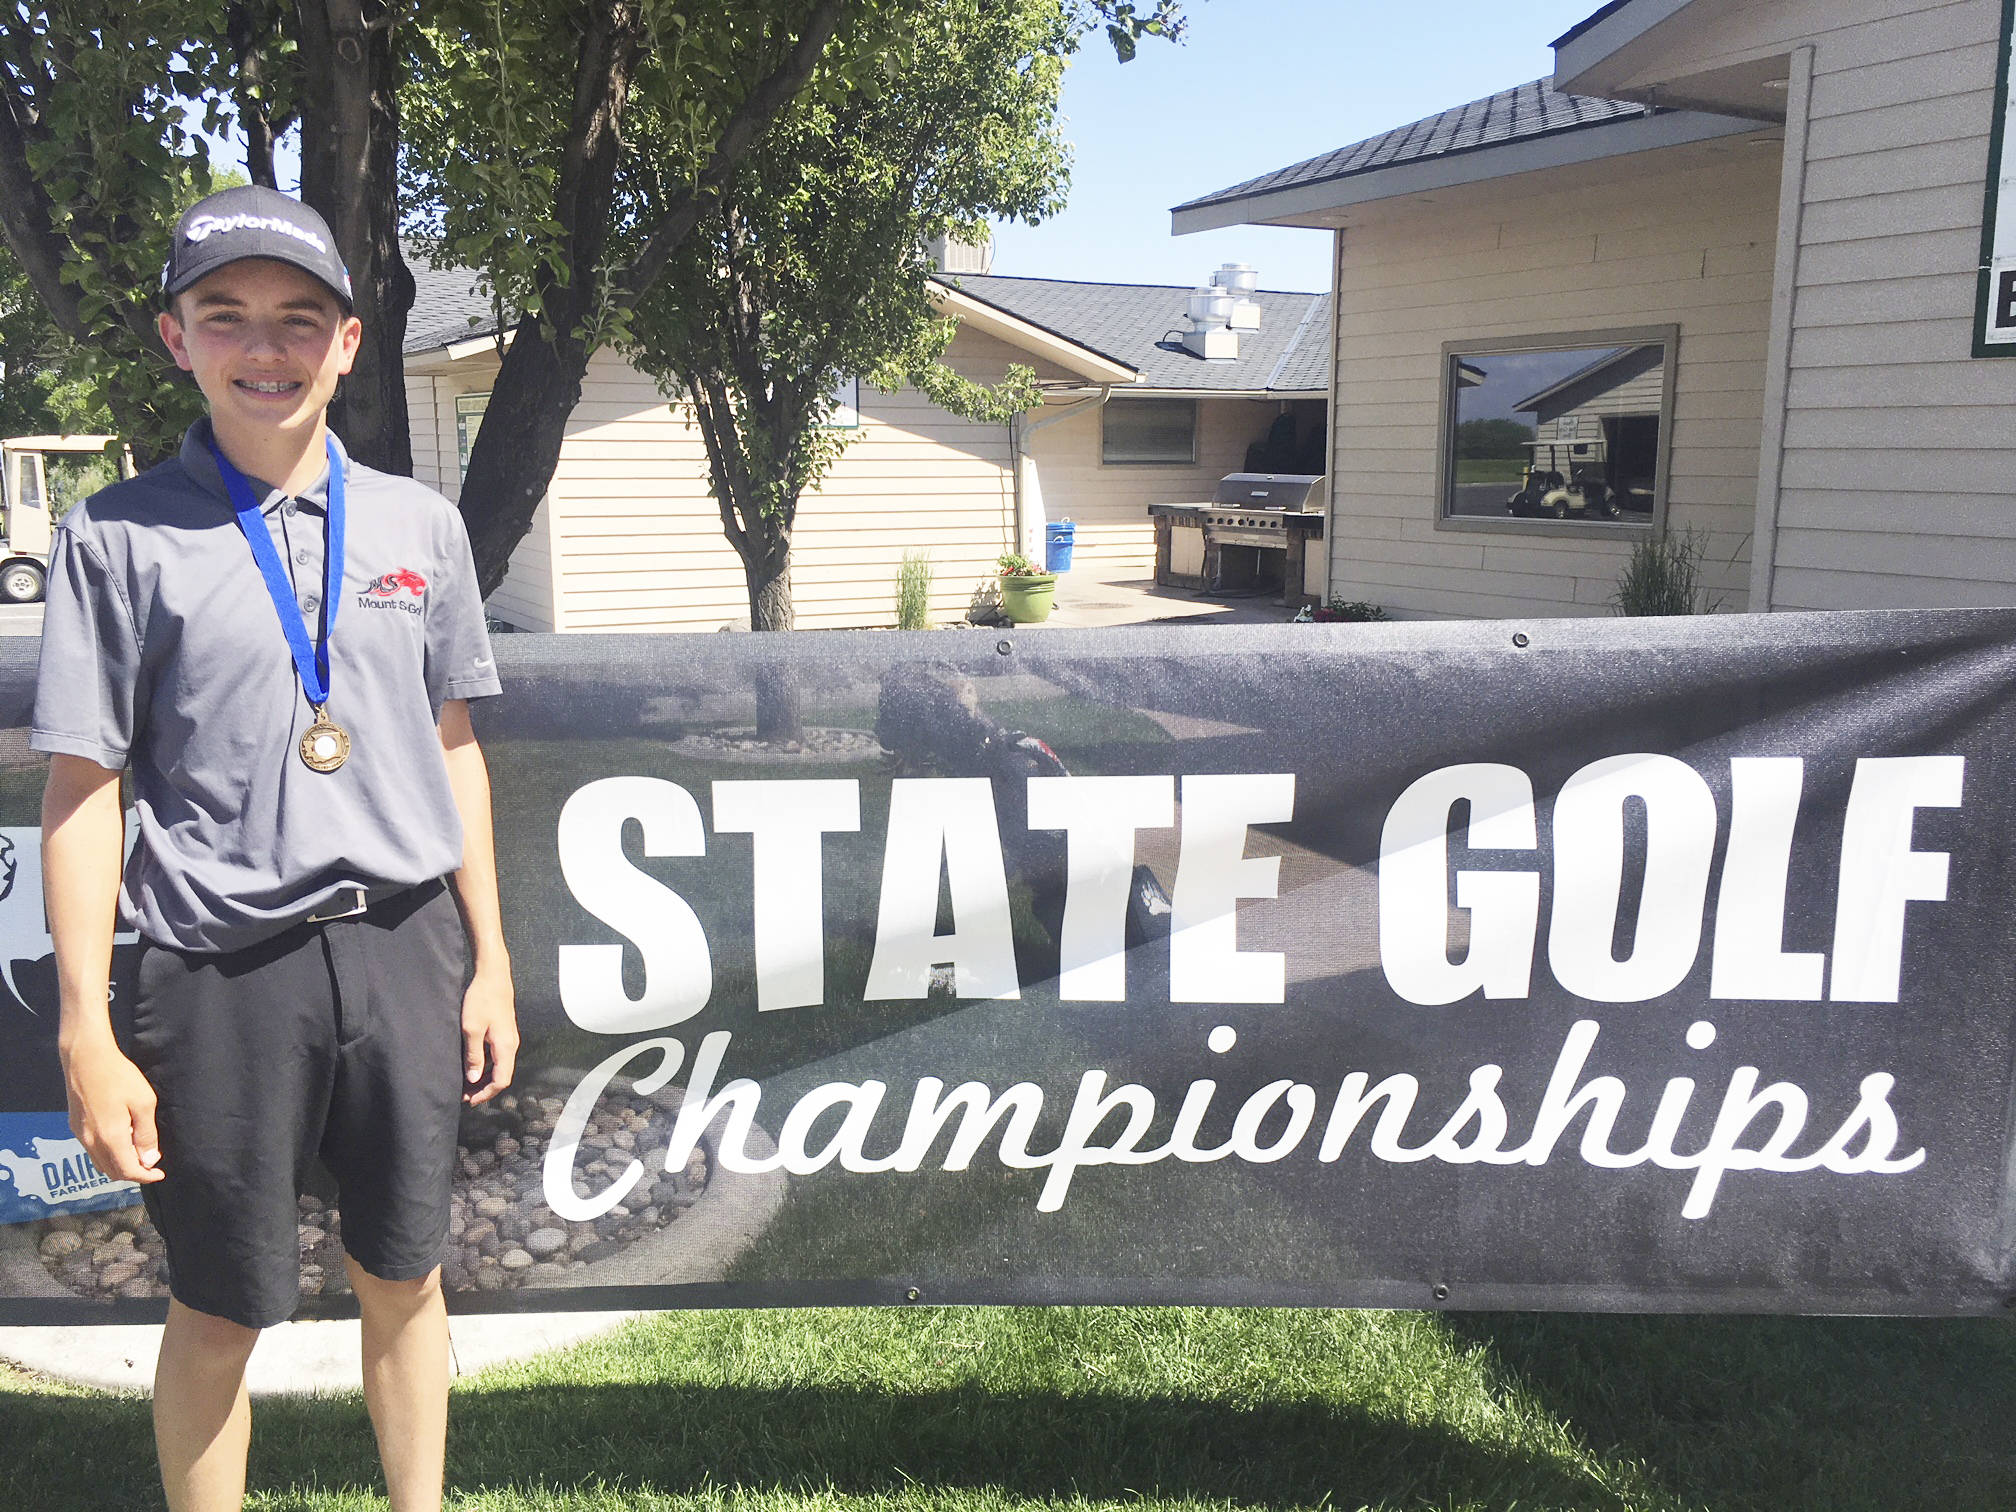 Drew Warford snagged the 4A state golf title. Photo courtesy of Robert Bostwick